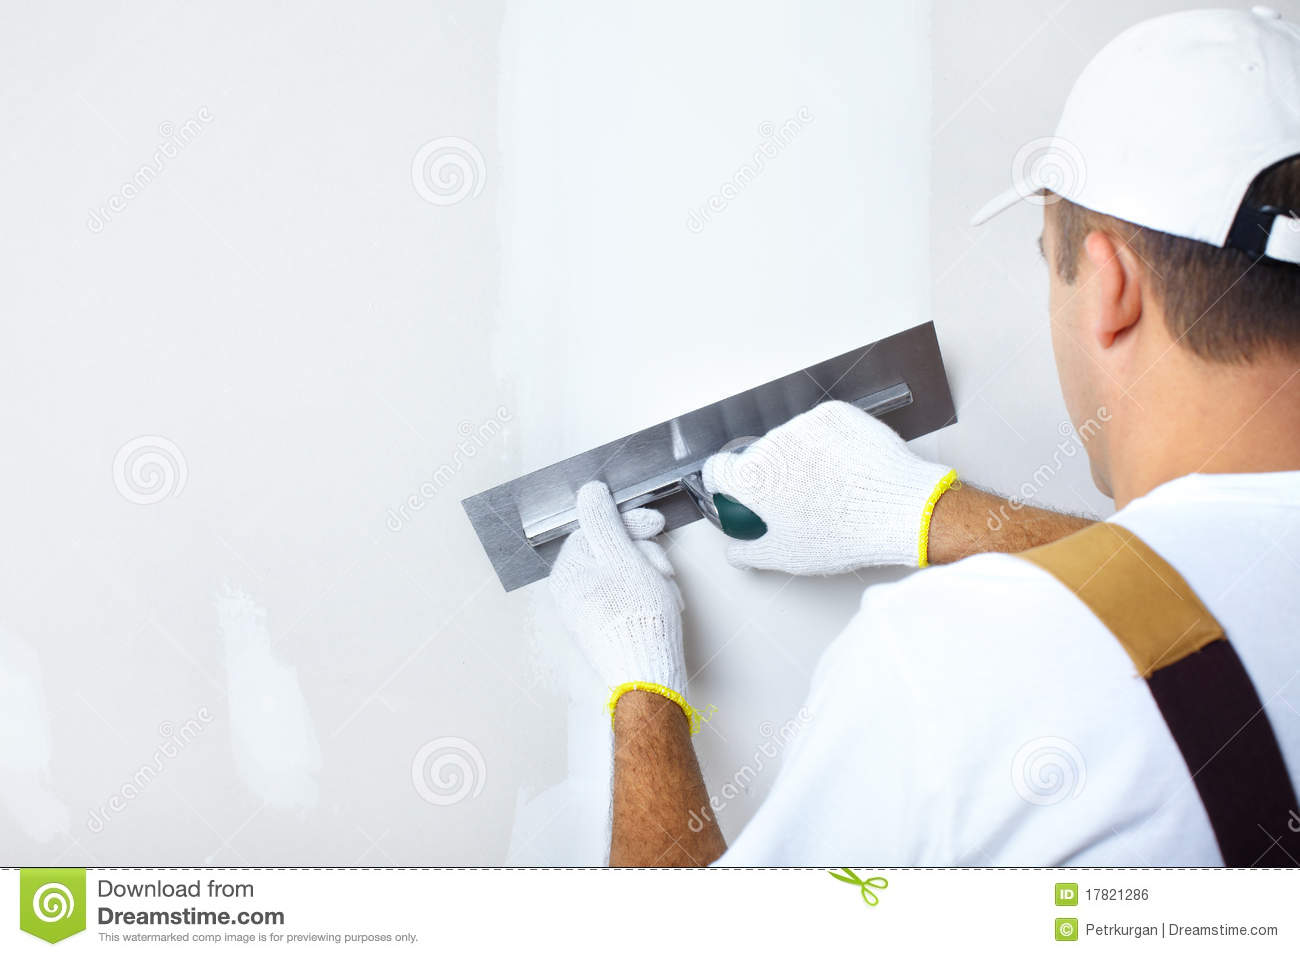 Contractor Plasterer Royalty Free Stock Image   Image  17821286